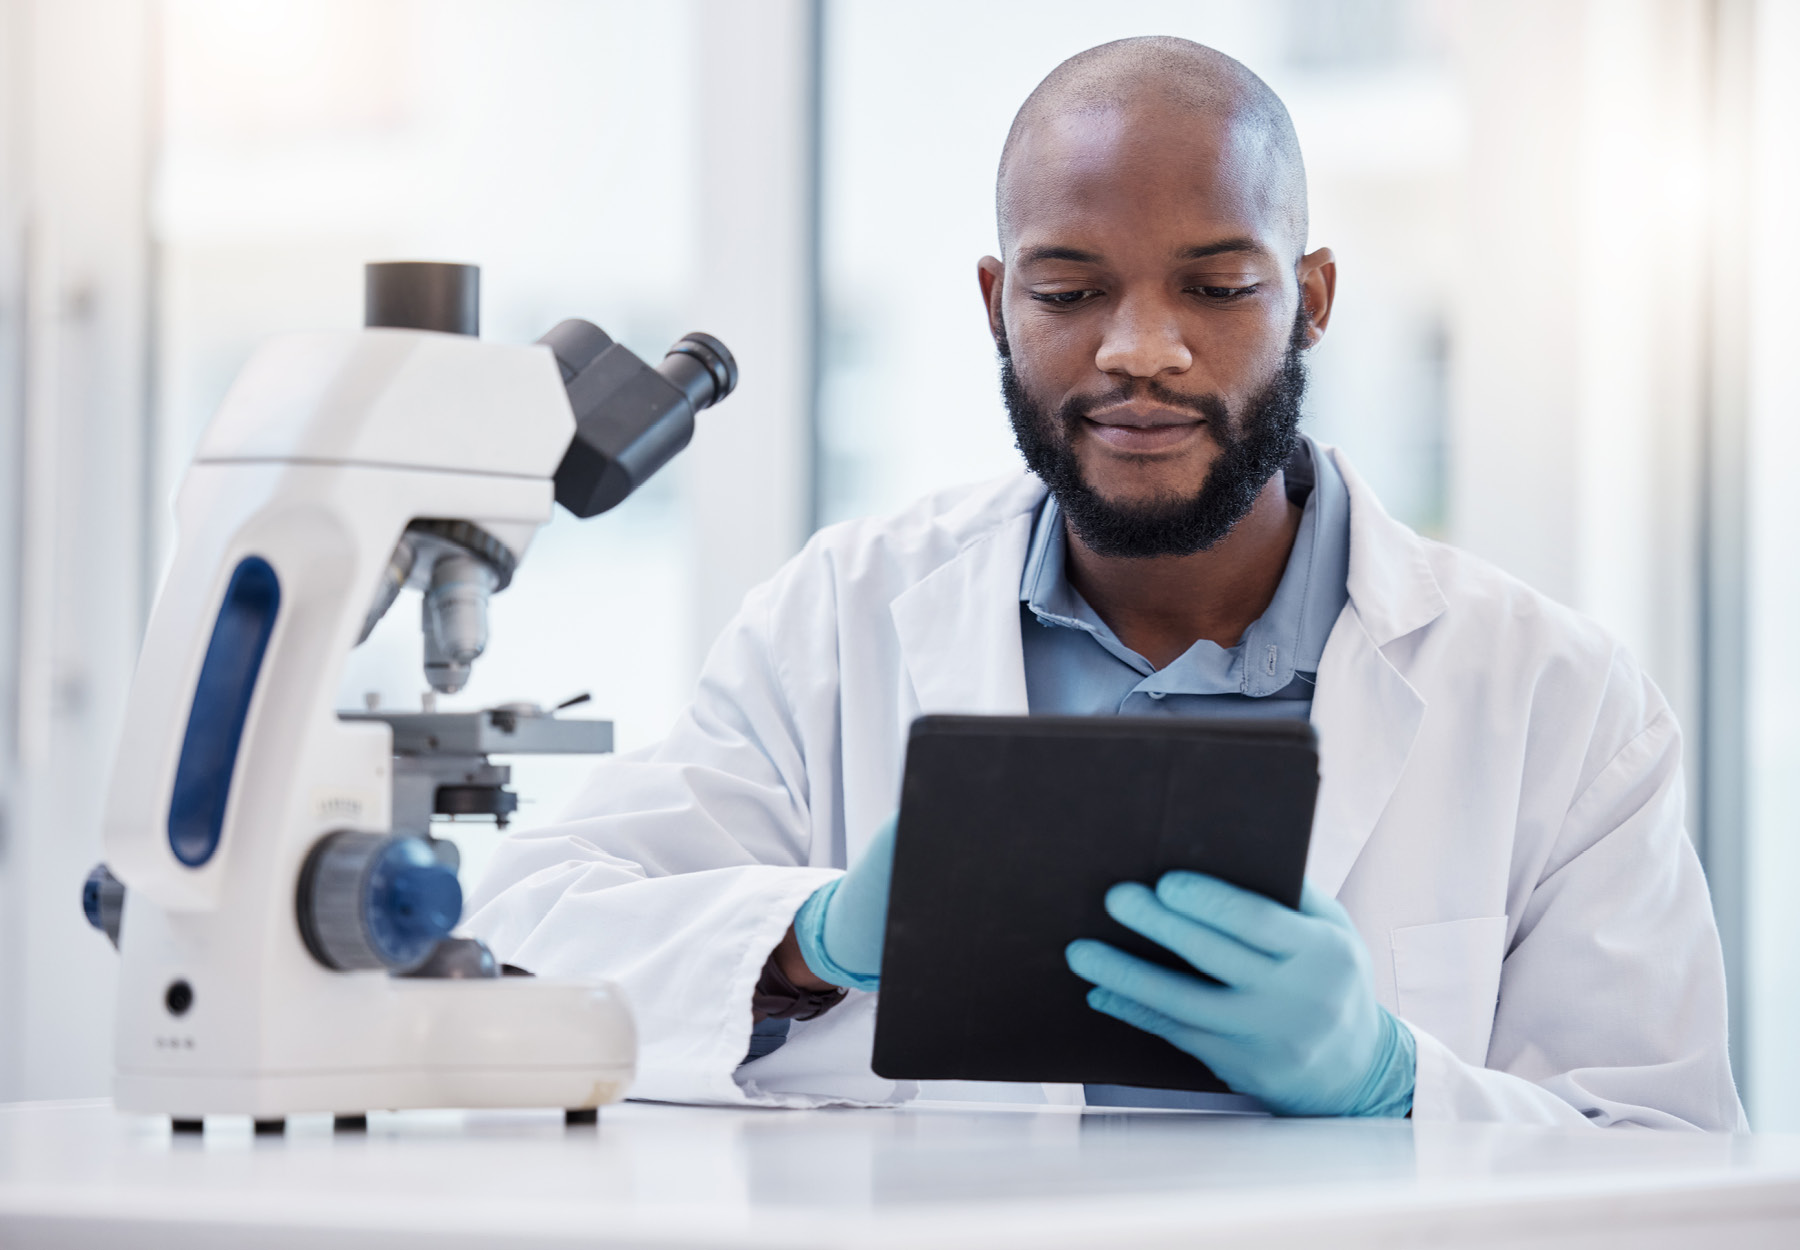 Clinical lab professional in lab coat and gloves working on a tablet. iStock image.